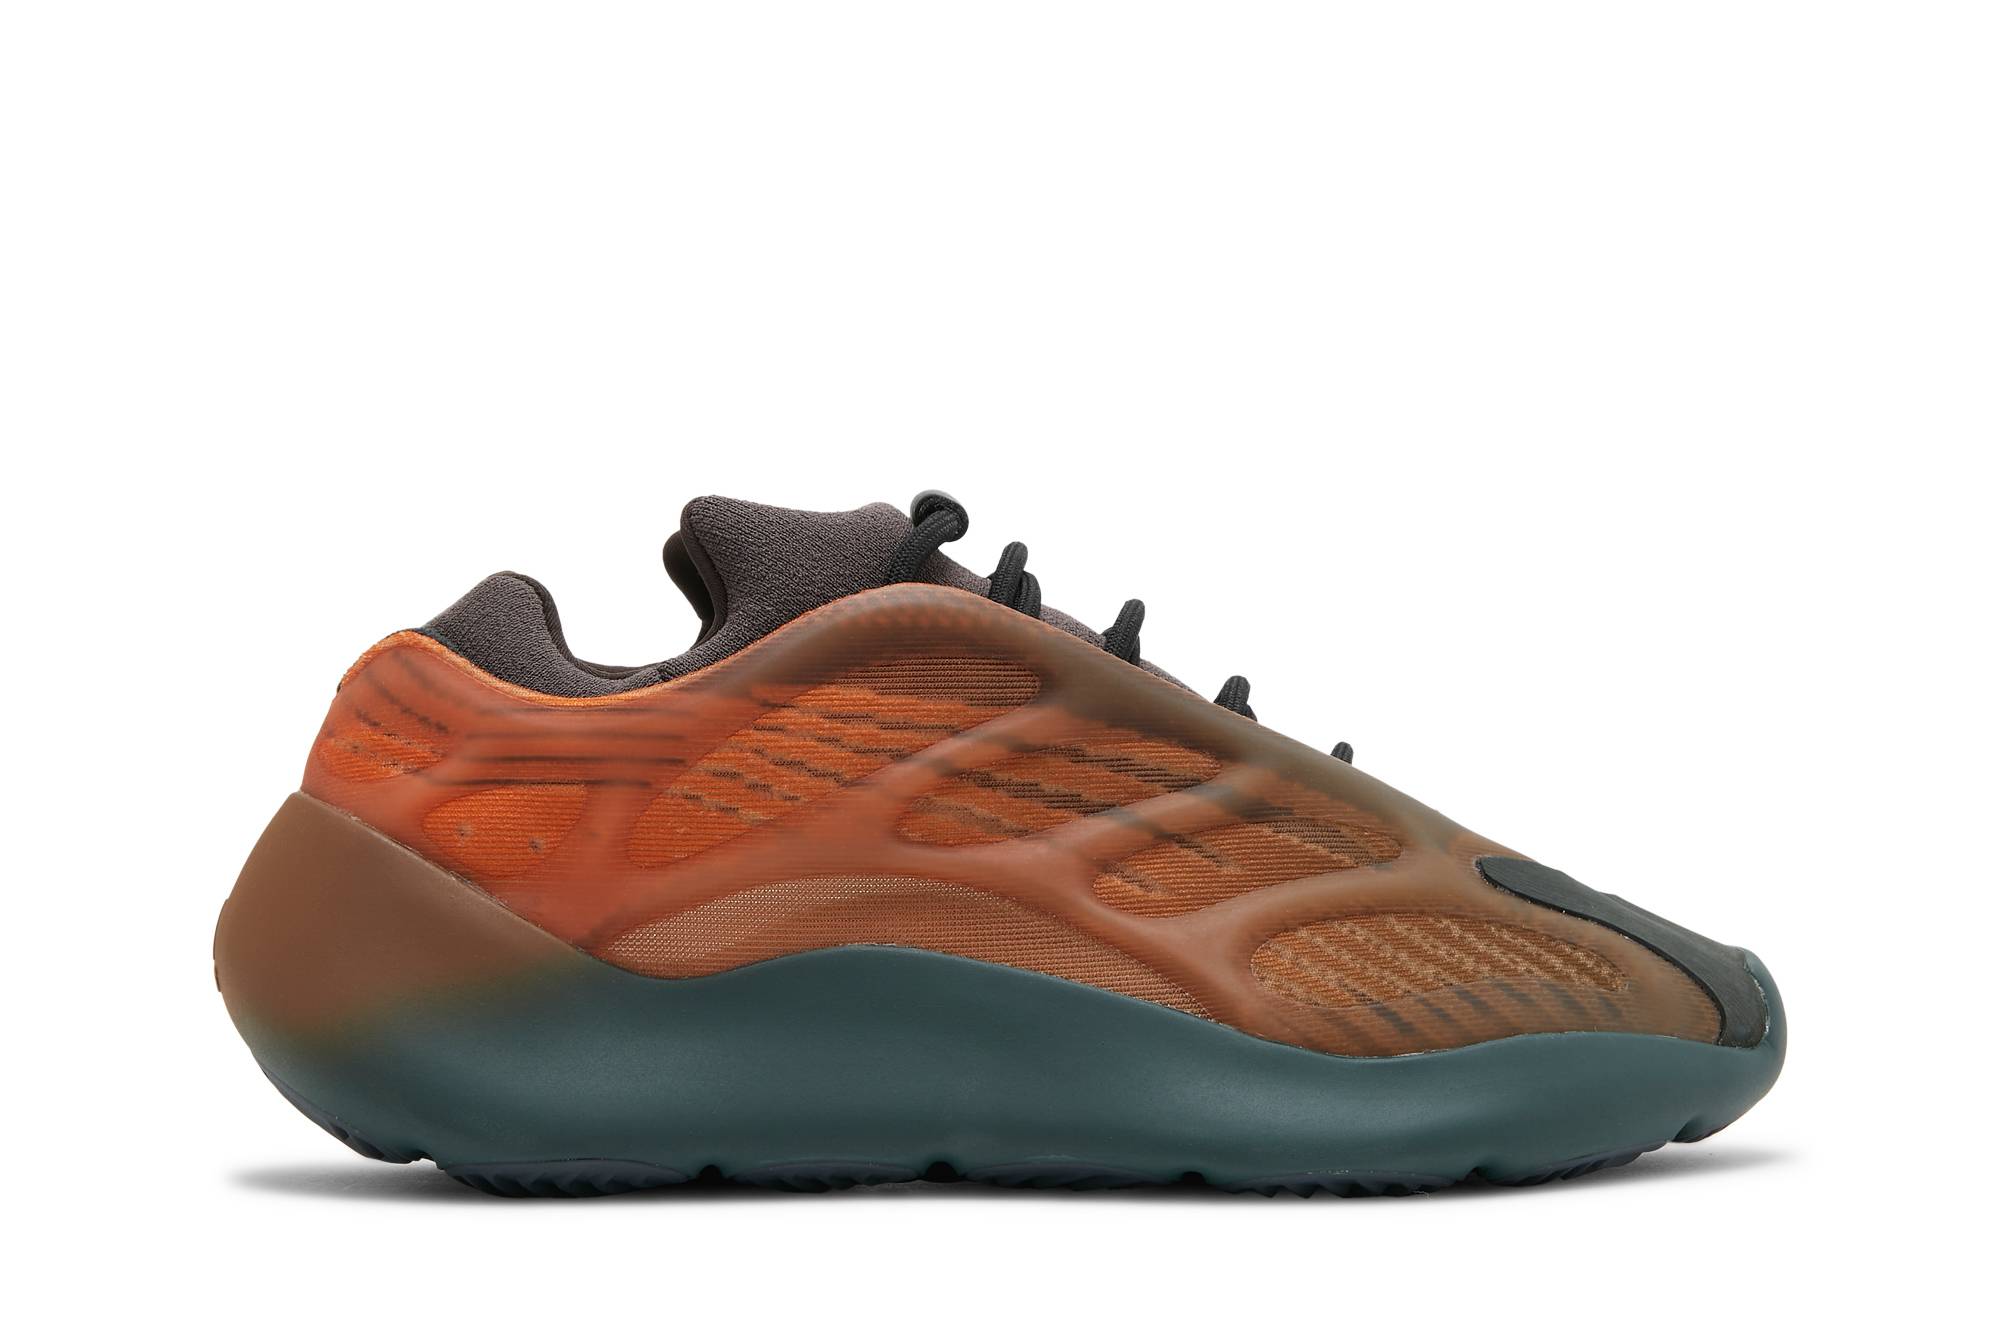 adidas Yeezy 700 V3 'Copper Fade' GY4109 - GY4109 - Novelship